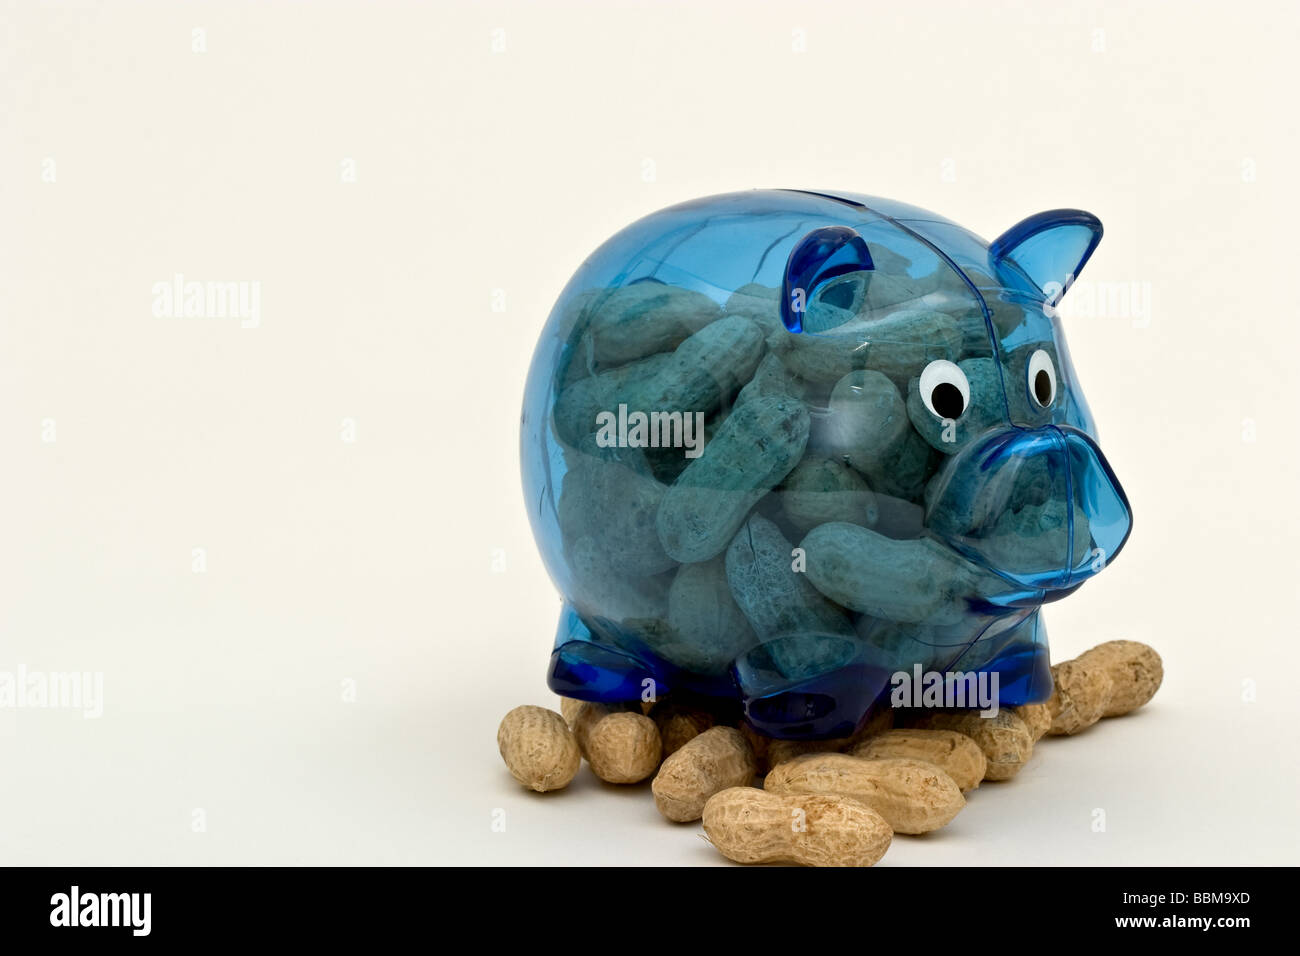 Clear blue piggy bank filled with and sitting on unshelled peanuts Stock Photo